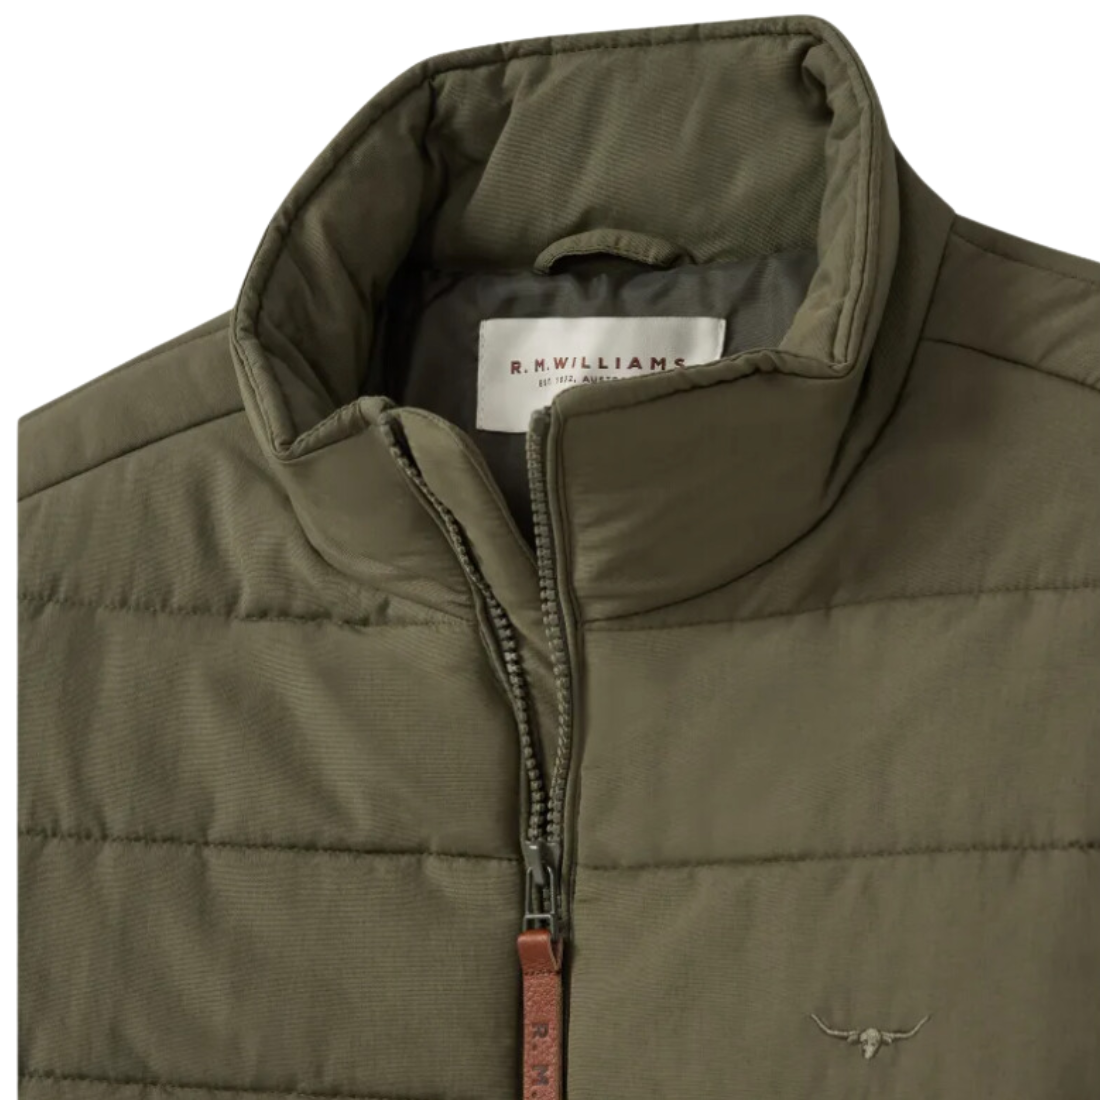 RM Williams Jacket Patterson Creek Jacket in Olive. Adelaide RMW Stockist